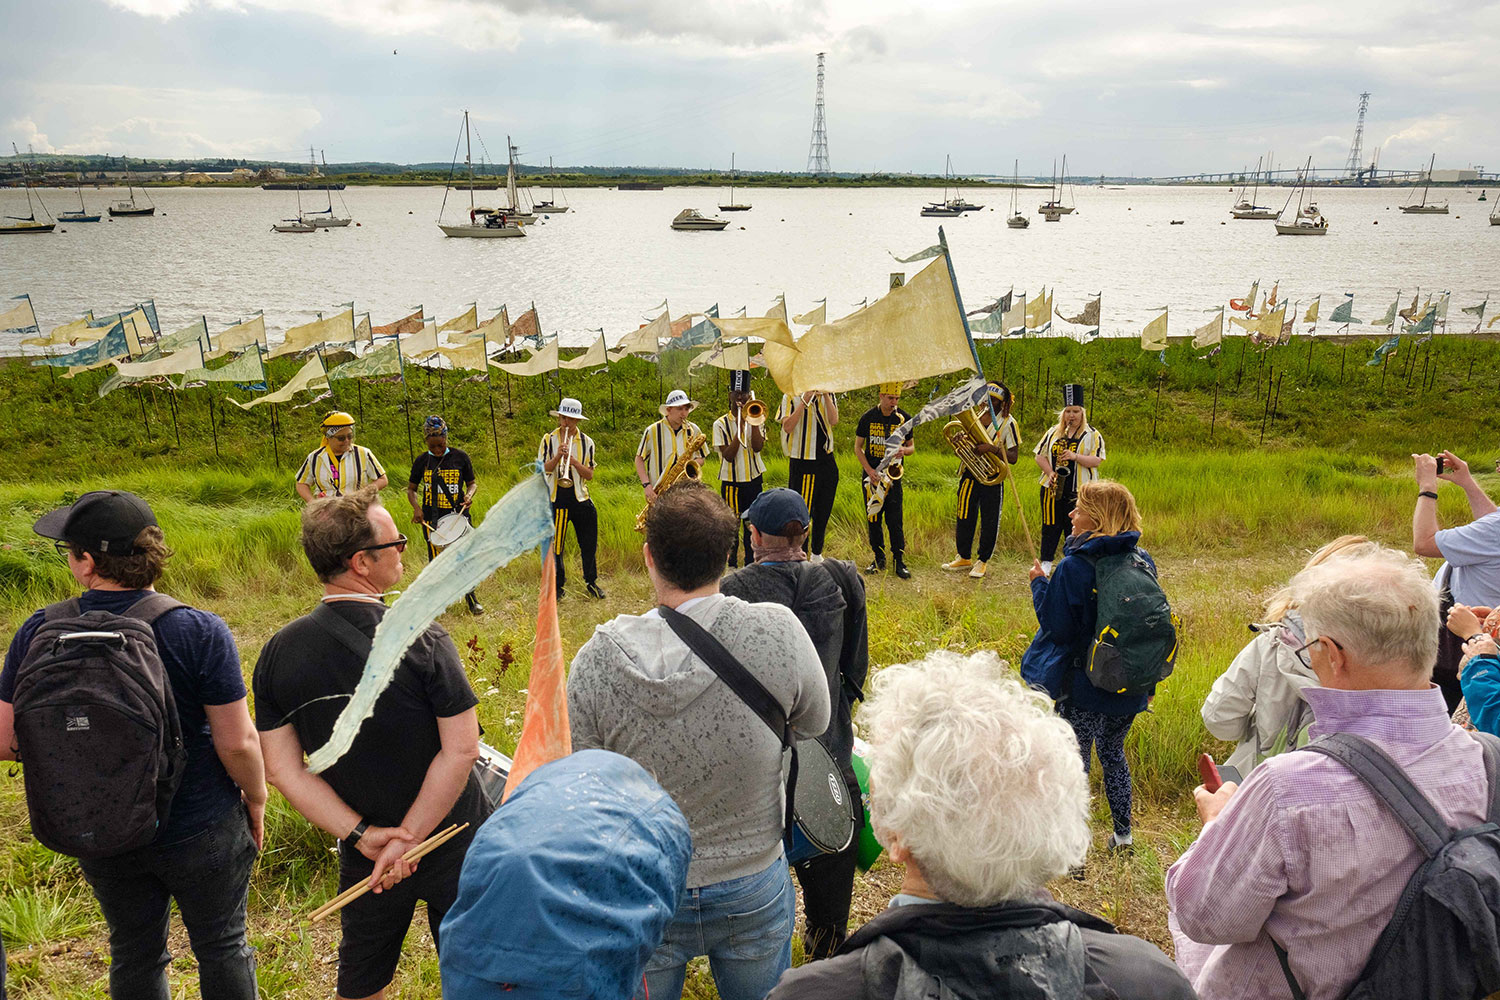 A crowd enjoys a performance by Kinetika Bloco on the banks of the Thames surrounded by Beach of Dreams pennants